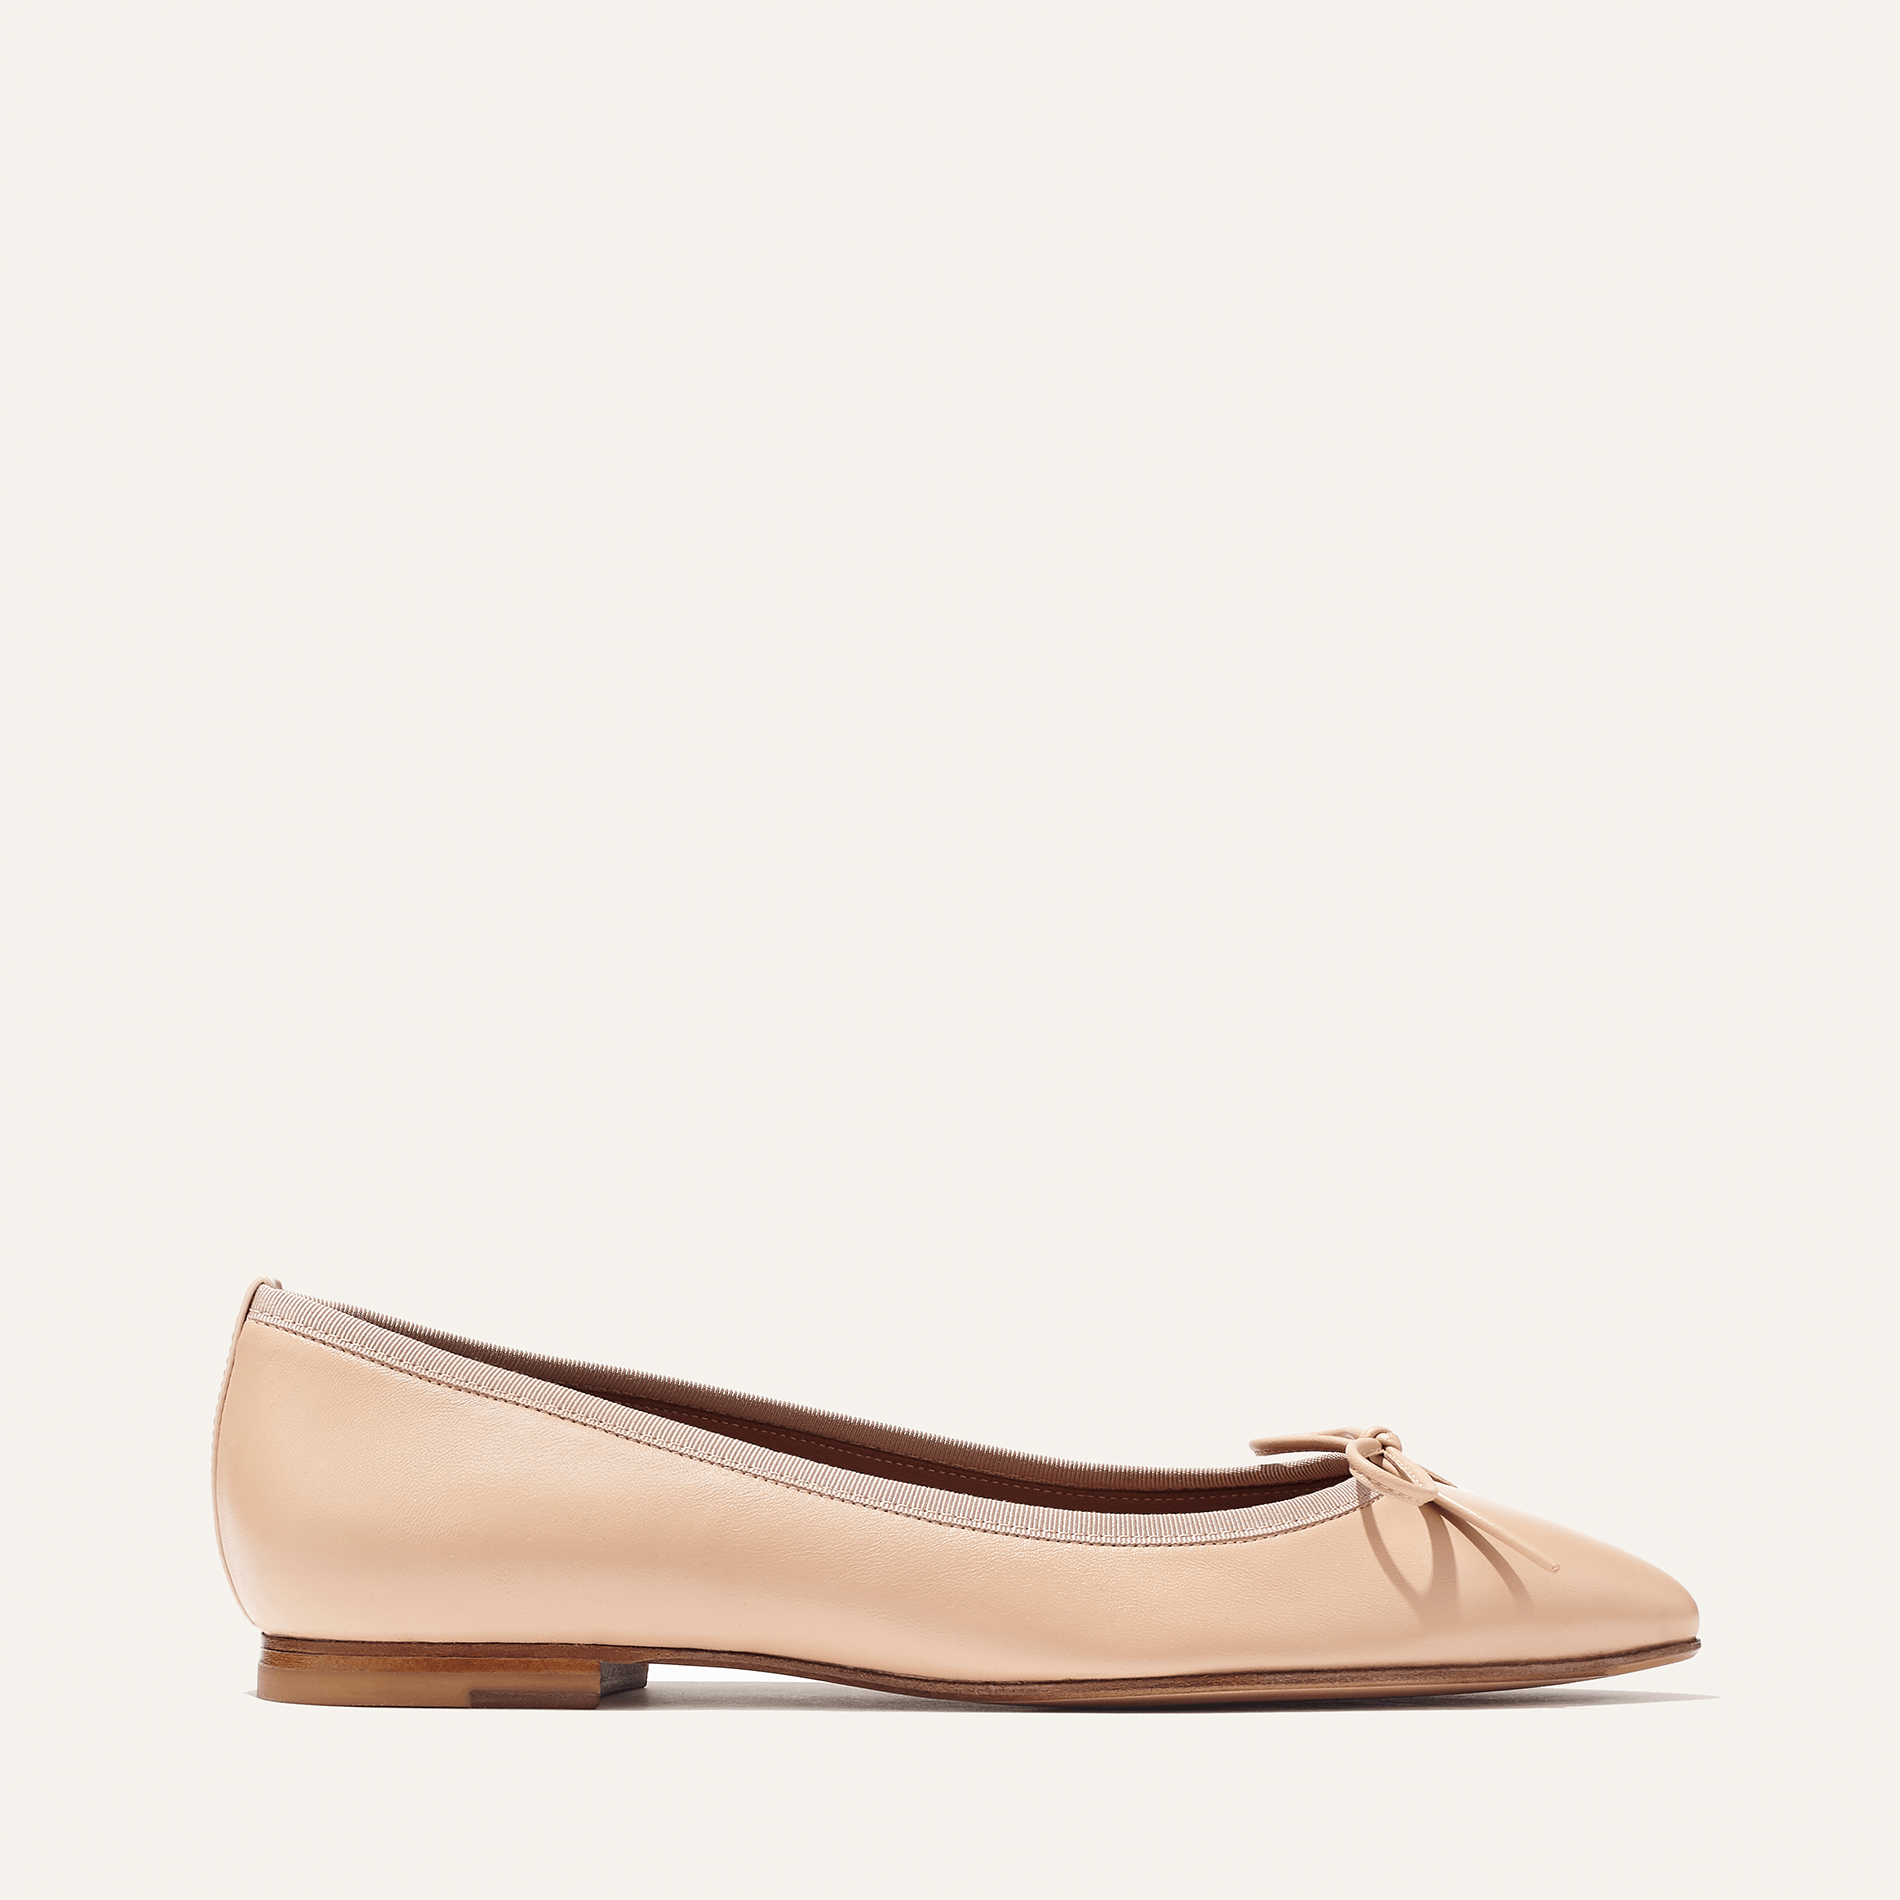 Margaux's classic and comfortable Pointe ballet flat in soft, nude pink Italian nappa leather with an elegant pointed toe